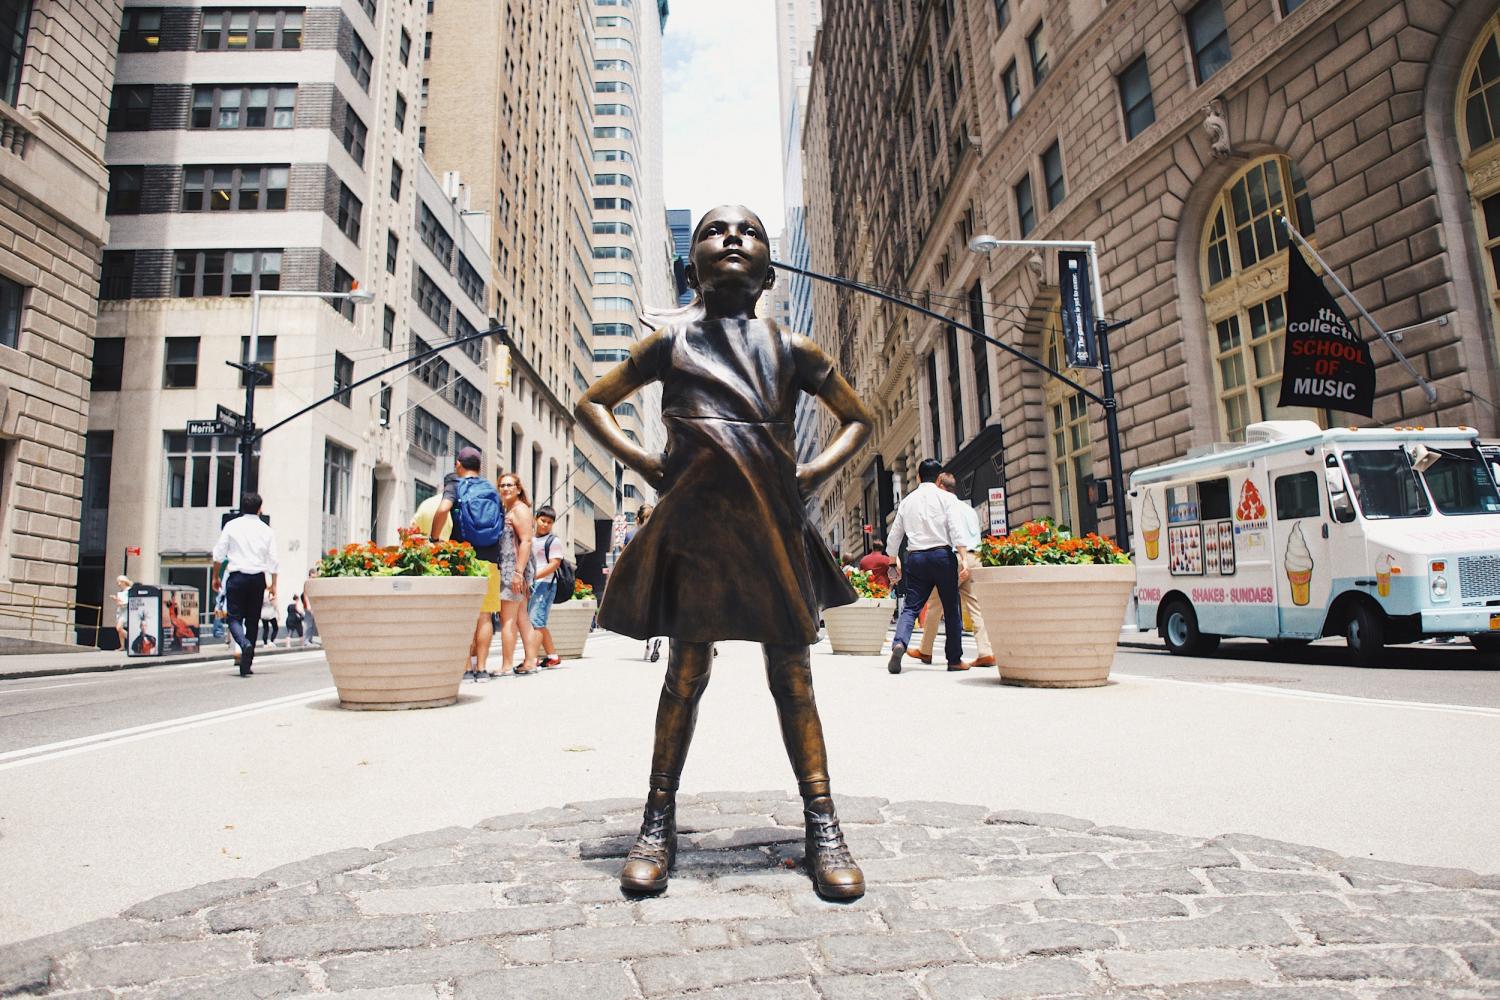 Fearless Girl statue - Goldman Sachs wants more women on boards